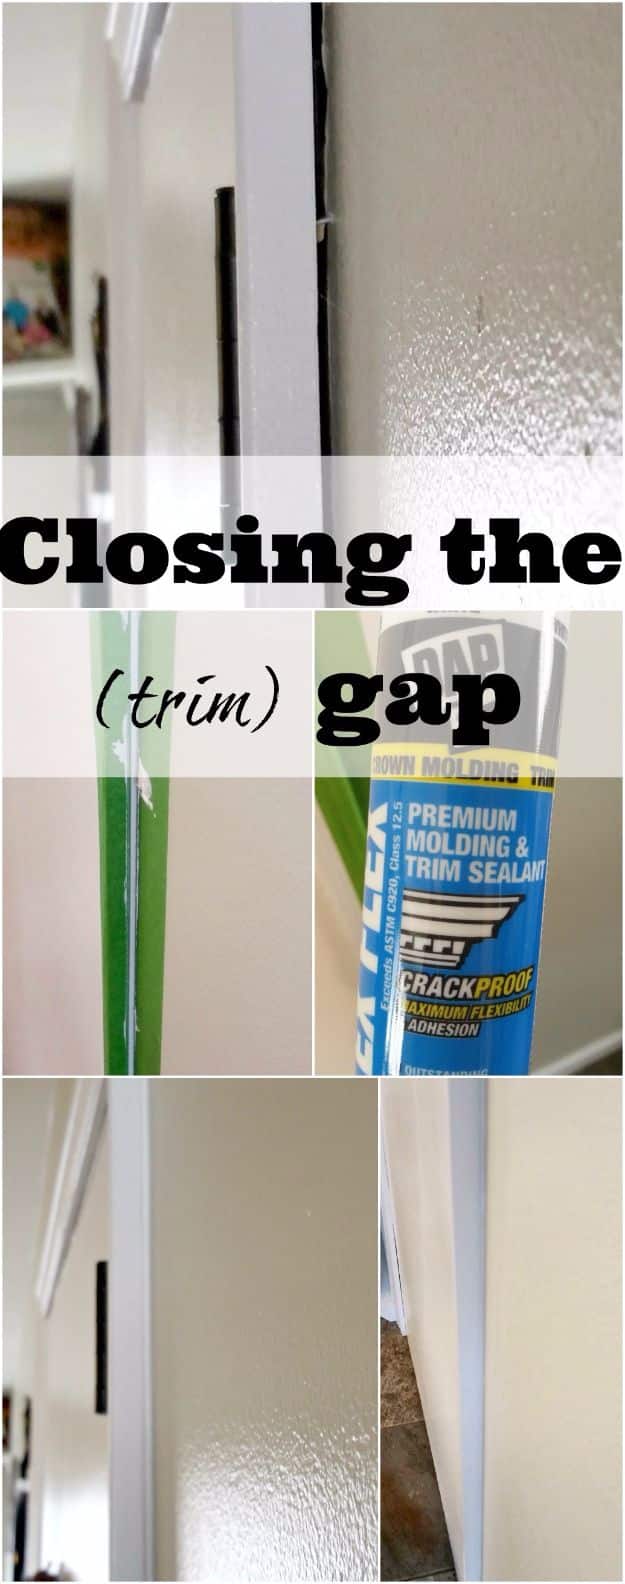 Easy Home Repair Hacks - Fixing The Gap In Trim - Quick Ways To Fix Your Home With Cheap and Fast DIY Projects - Step by step Tutorials, Good Ideas for Renovating, Simple Tips and Tricks for Home Improvement on A Budget #diy #homeimprovement